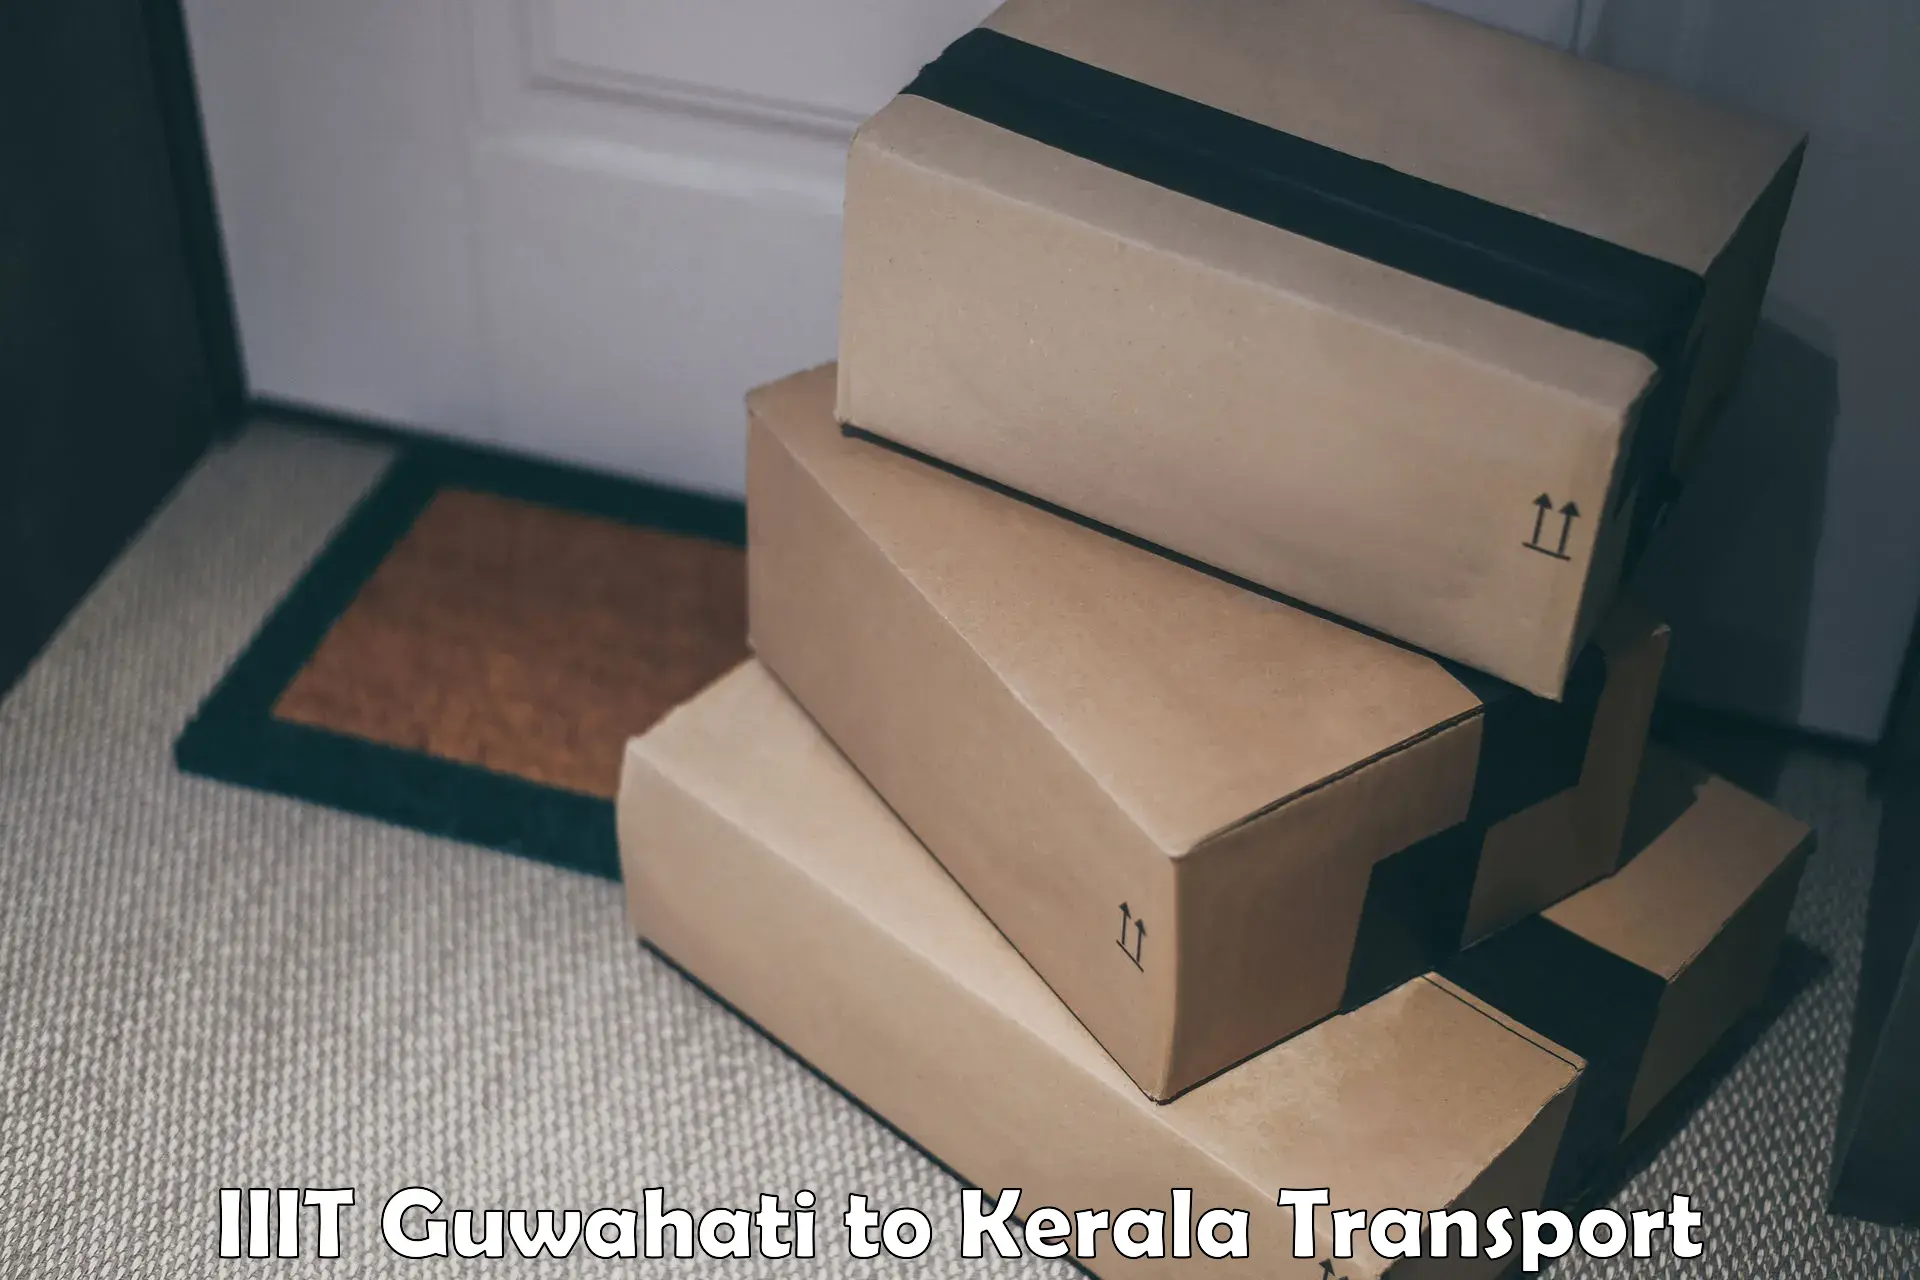 Road transport online services IIIT Guwahati to Calicut